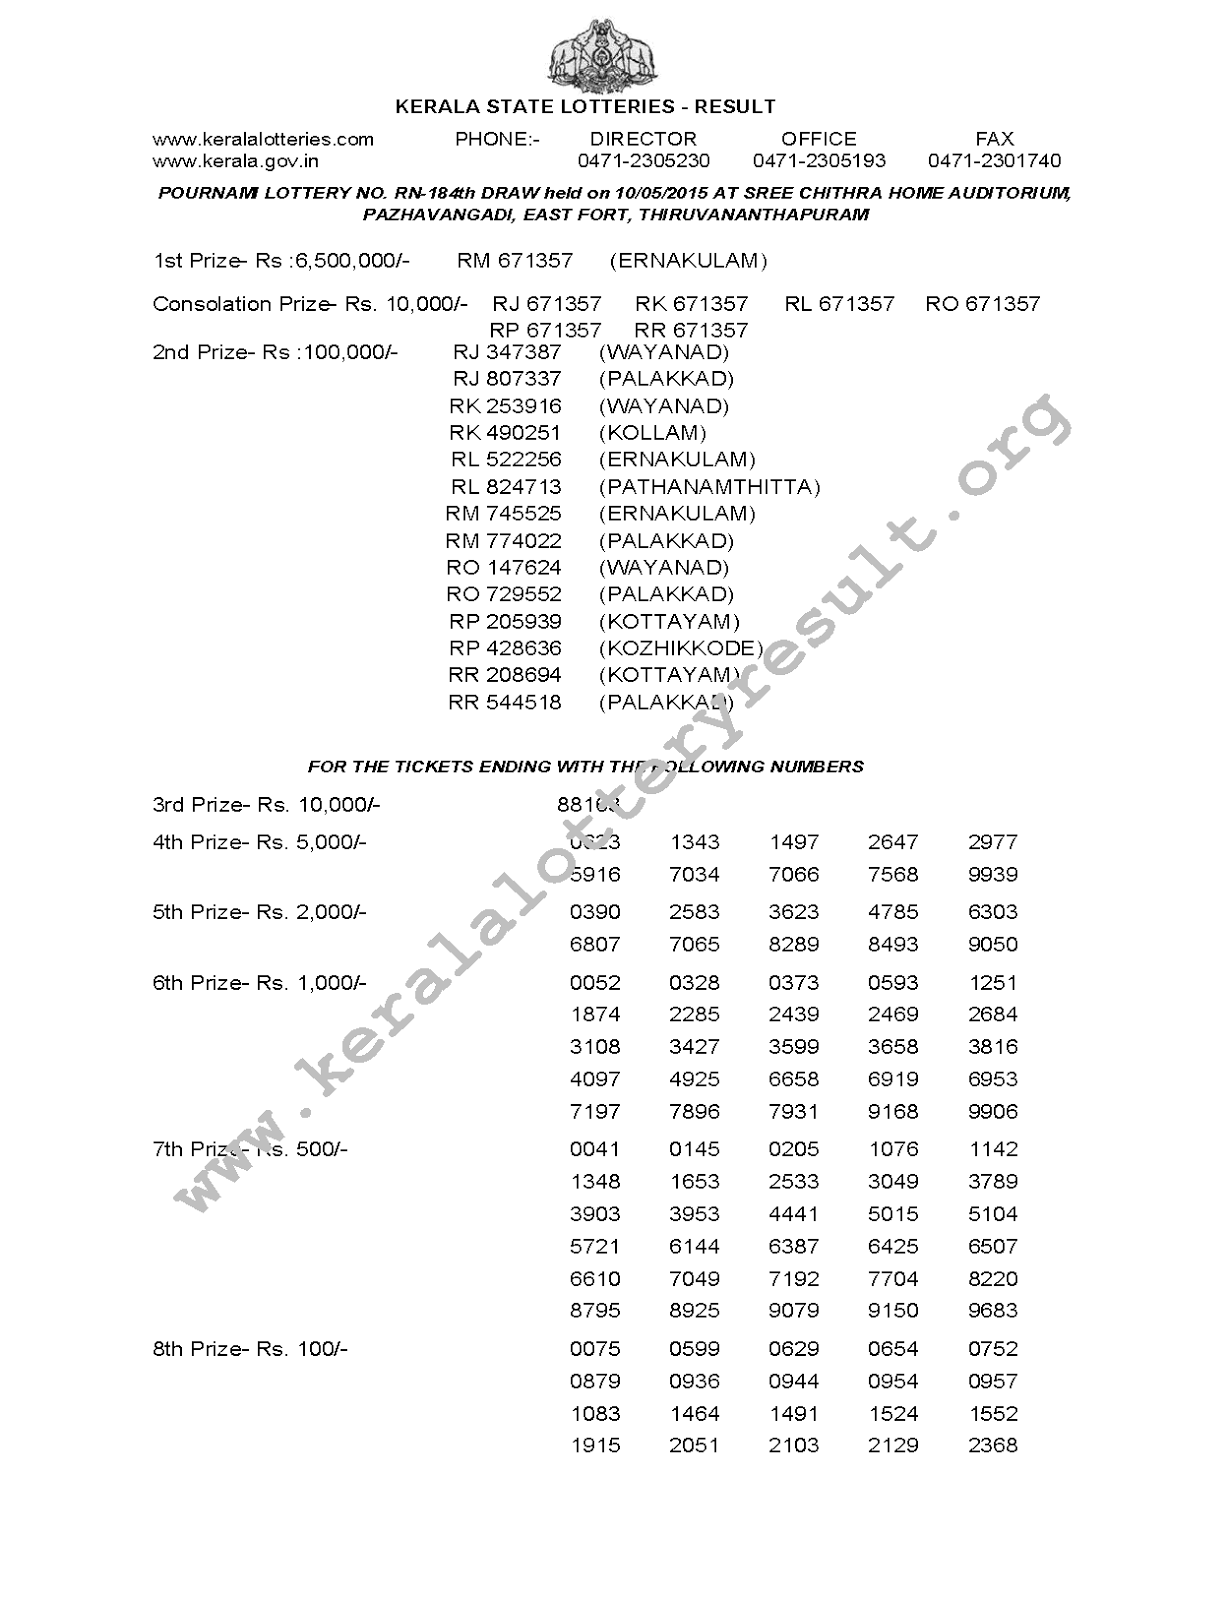 POURNAMI Lottery RN 184 Result 10-5-2015